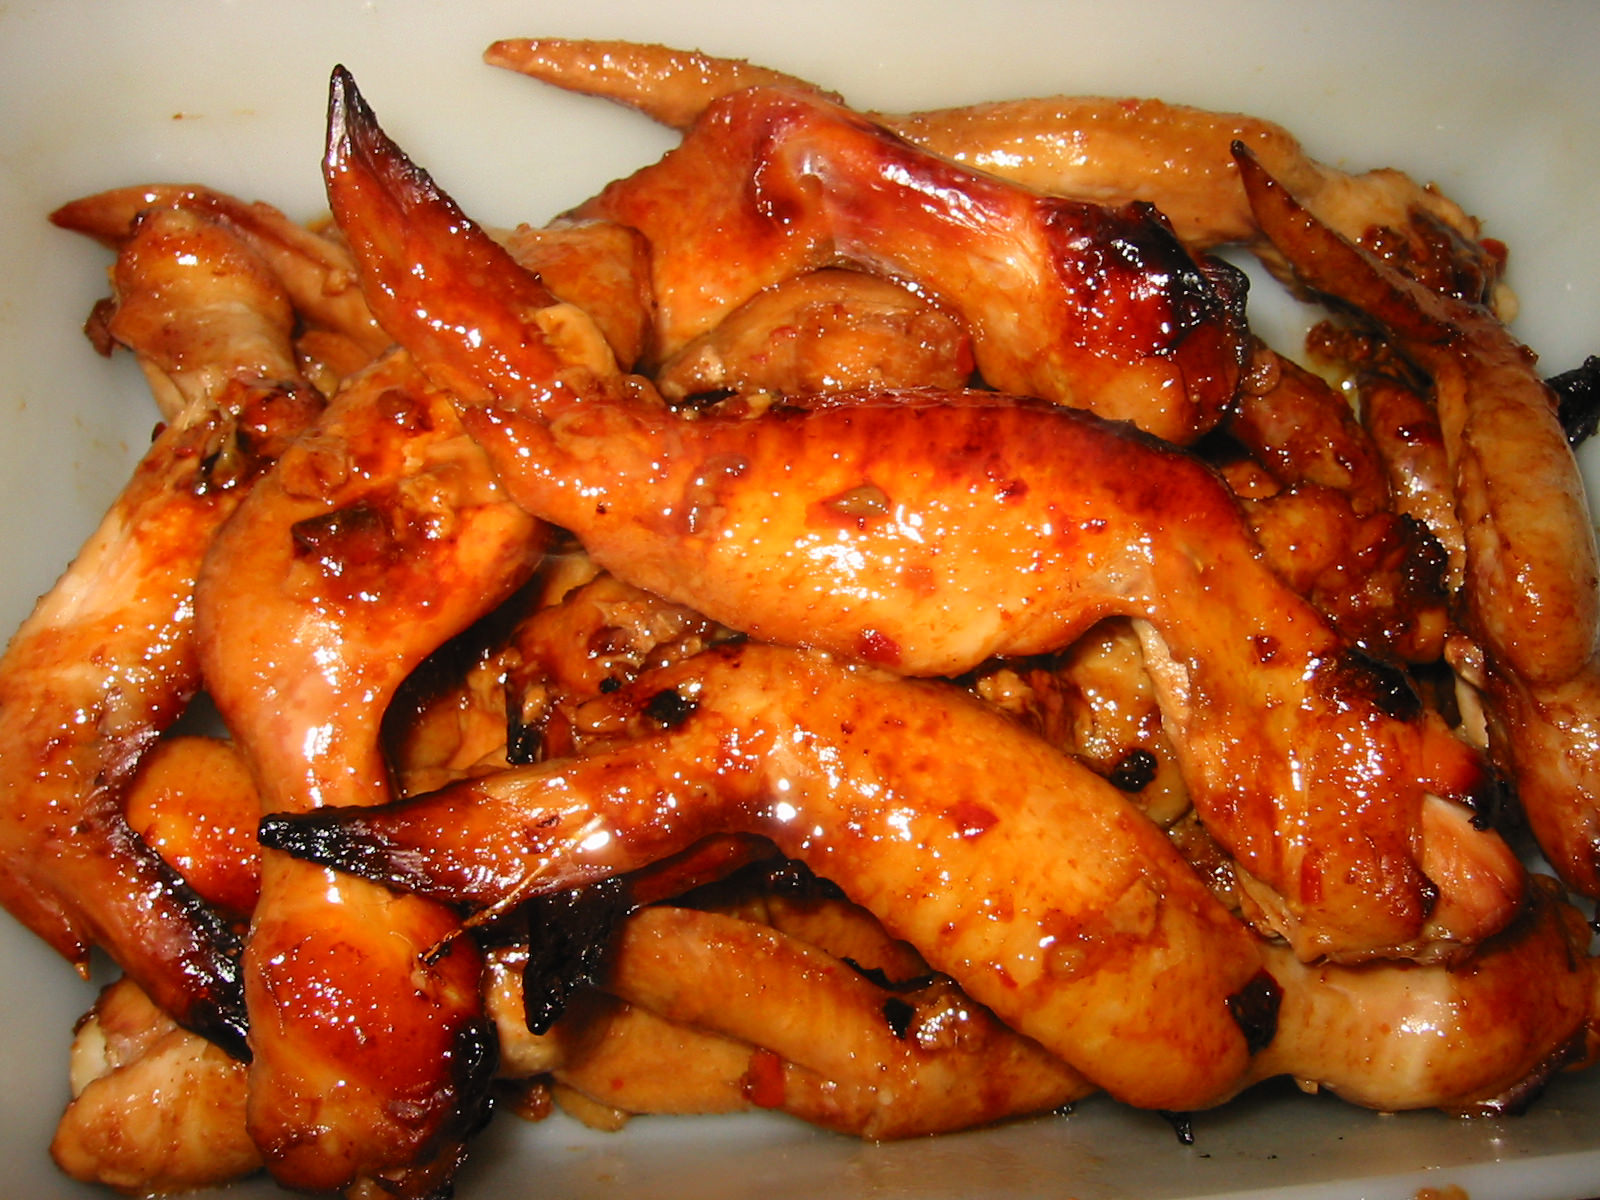 Marinated chicken wings - ready to go